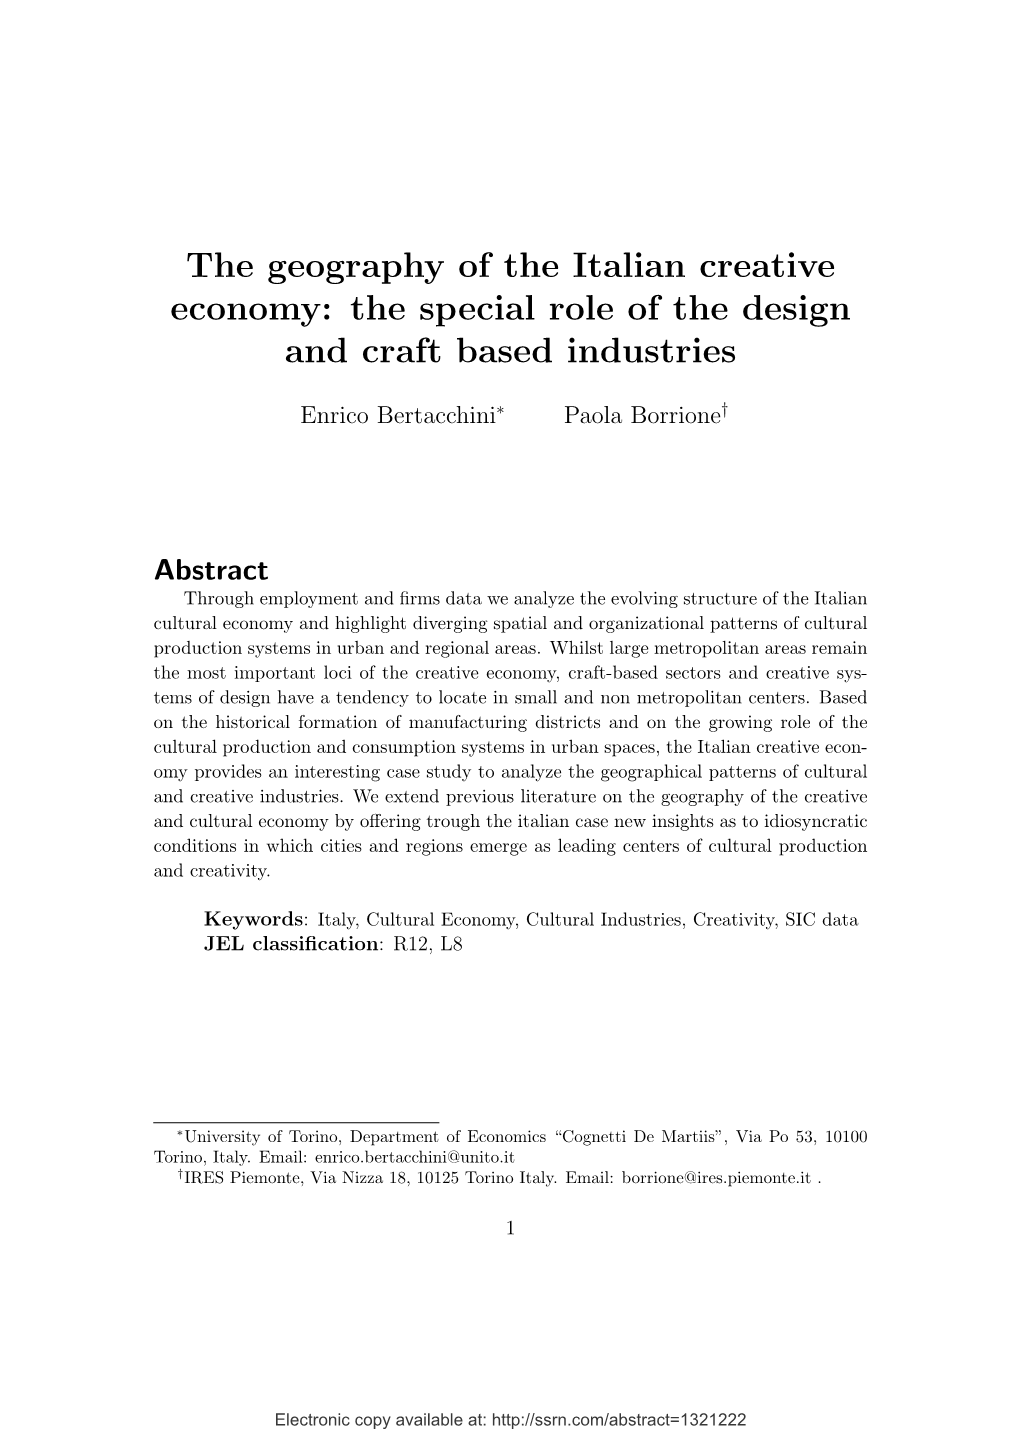 The Geography of the Italian Creative Economy: the Special Role of the Design and Craft Based Industries